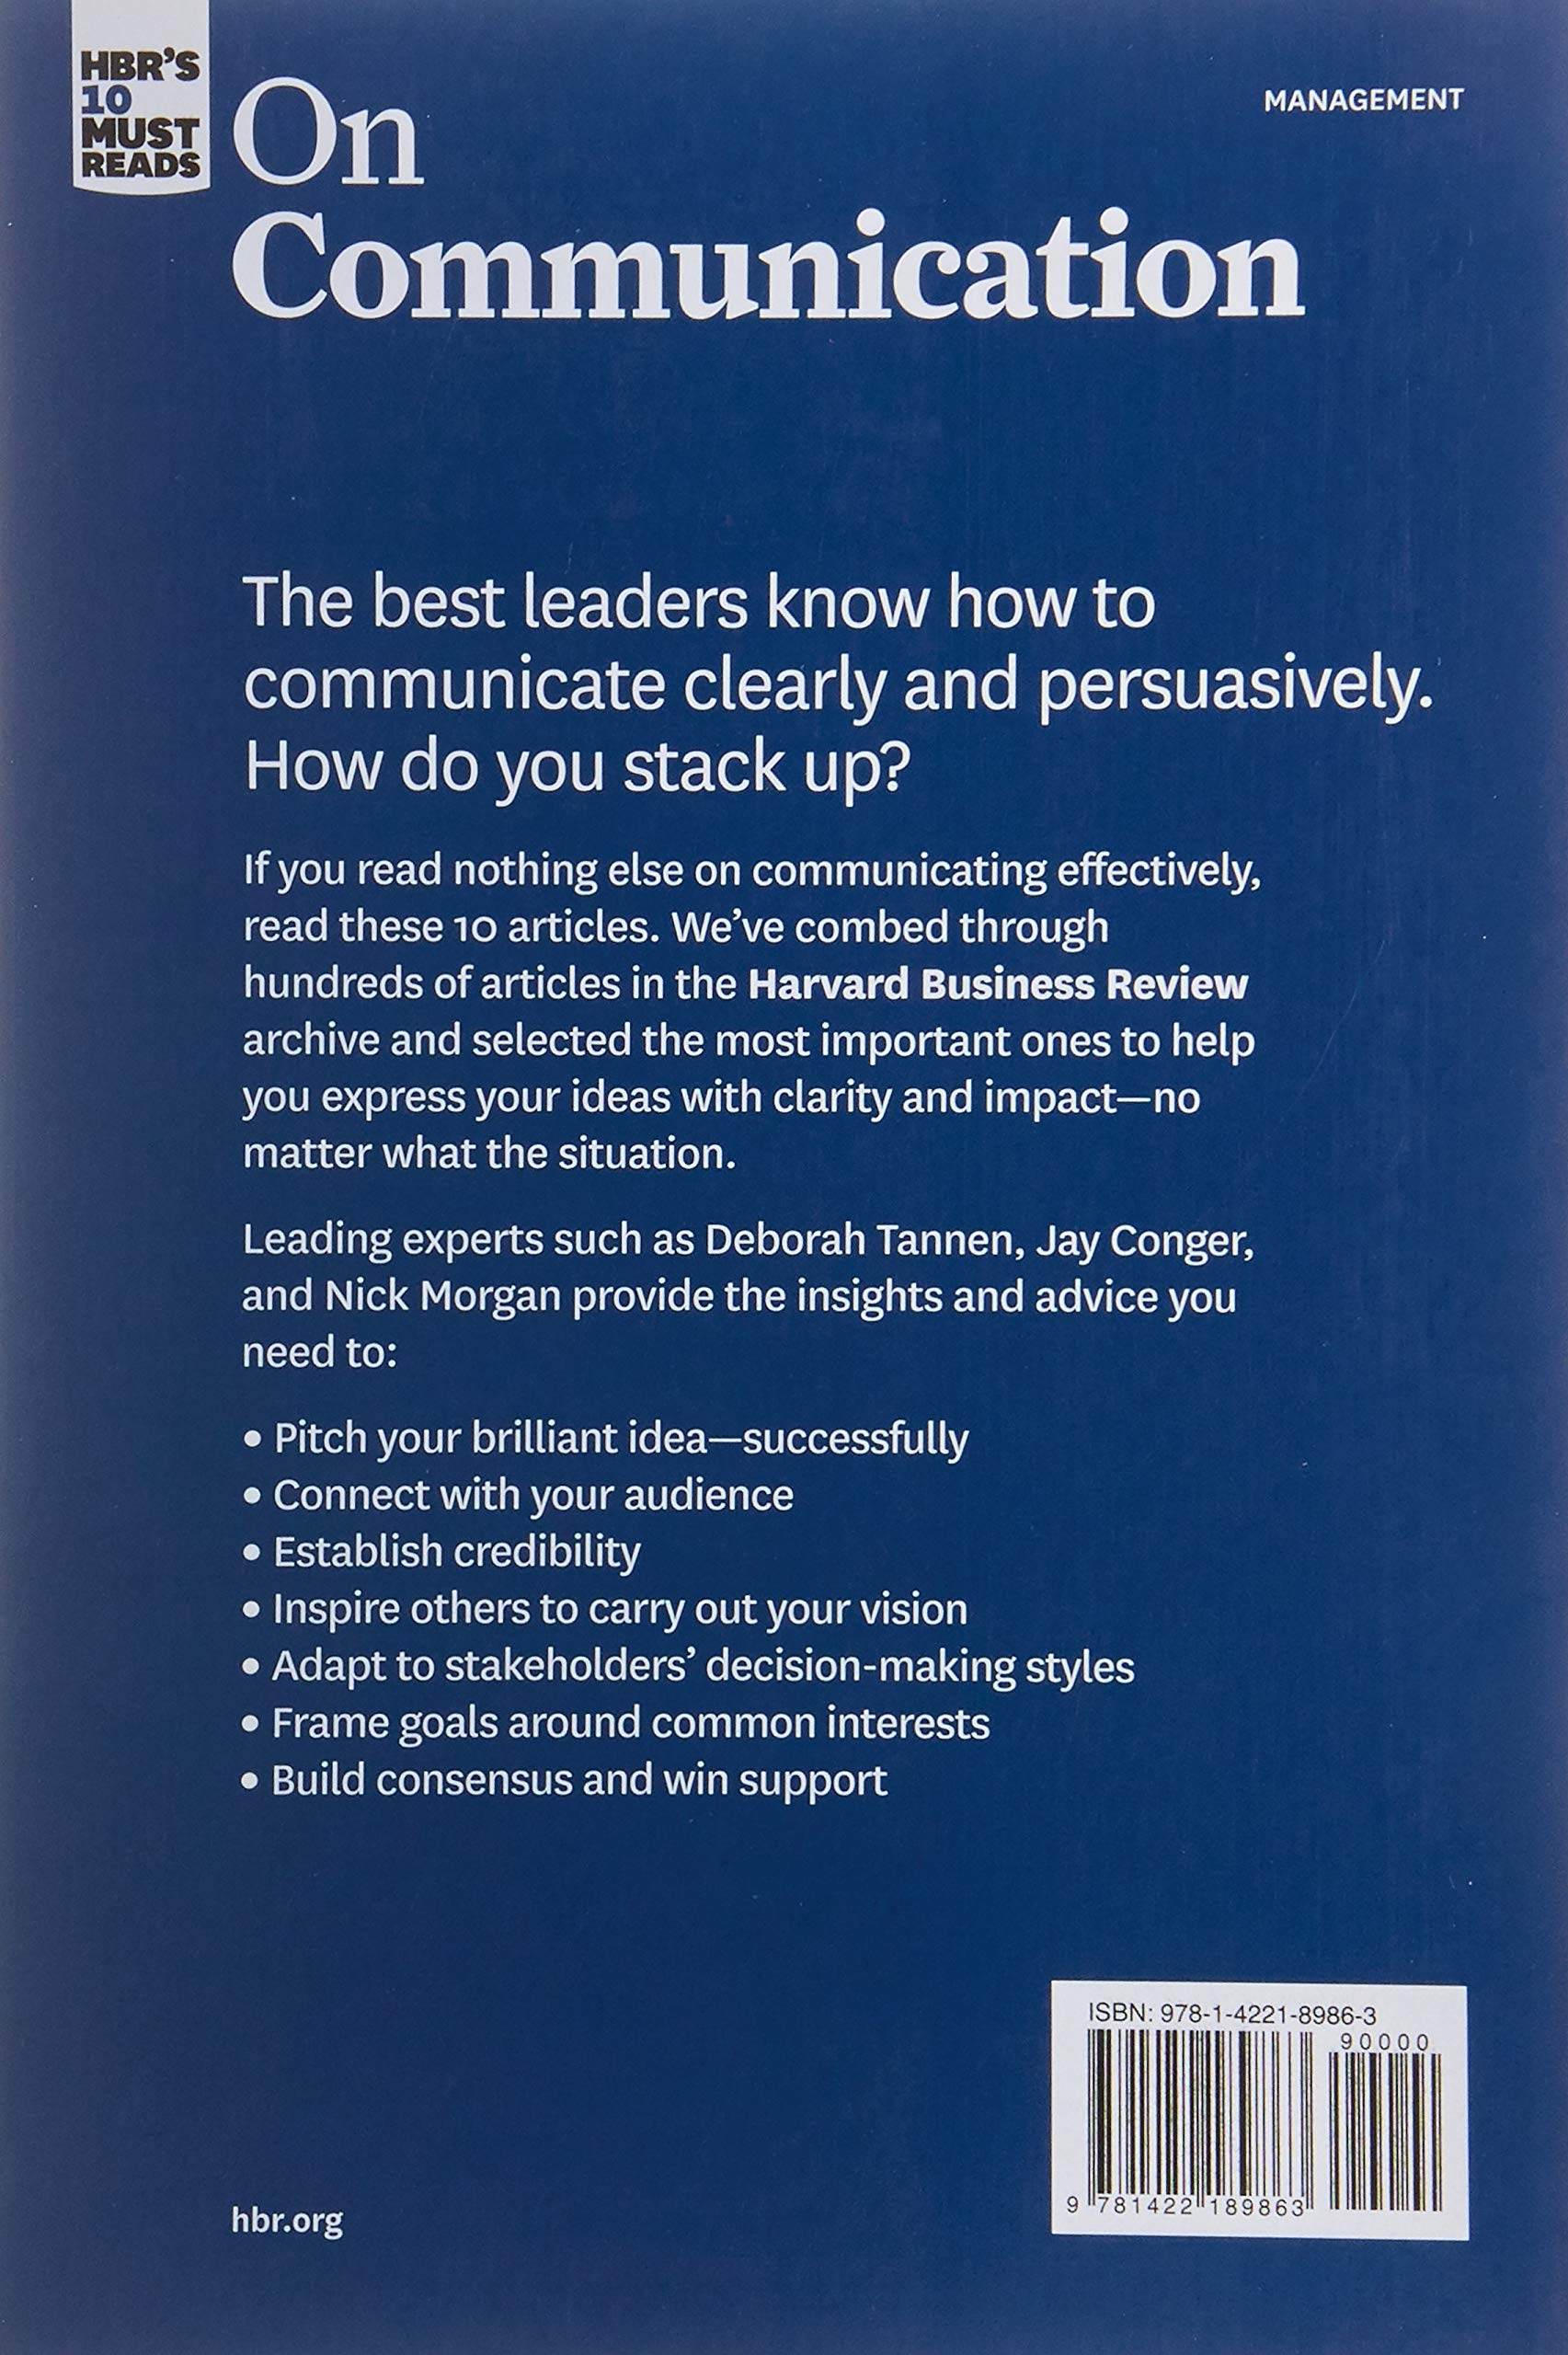 HBR's 10 Must Reads: On Communication